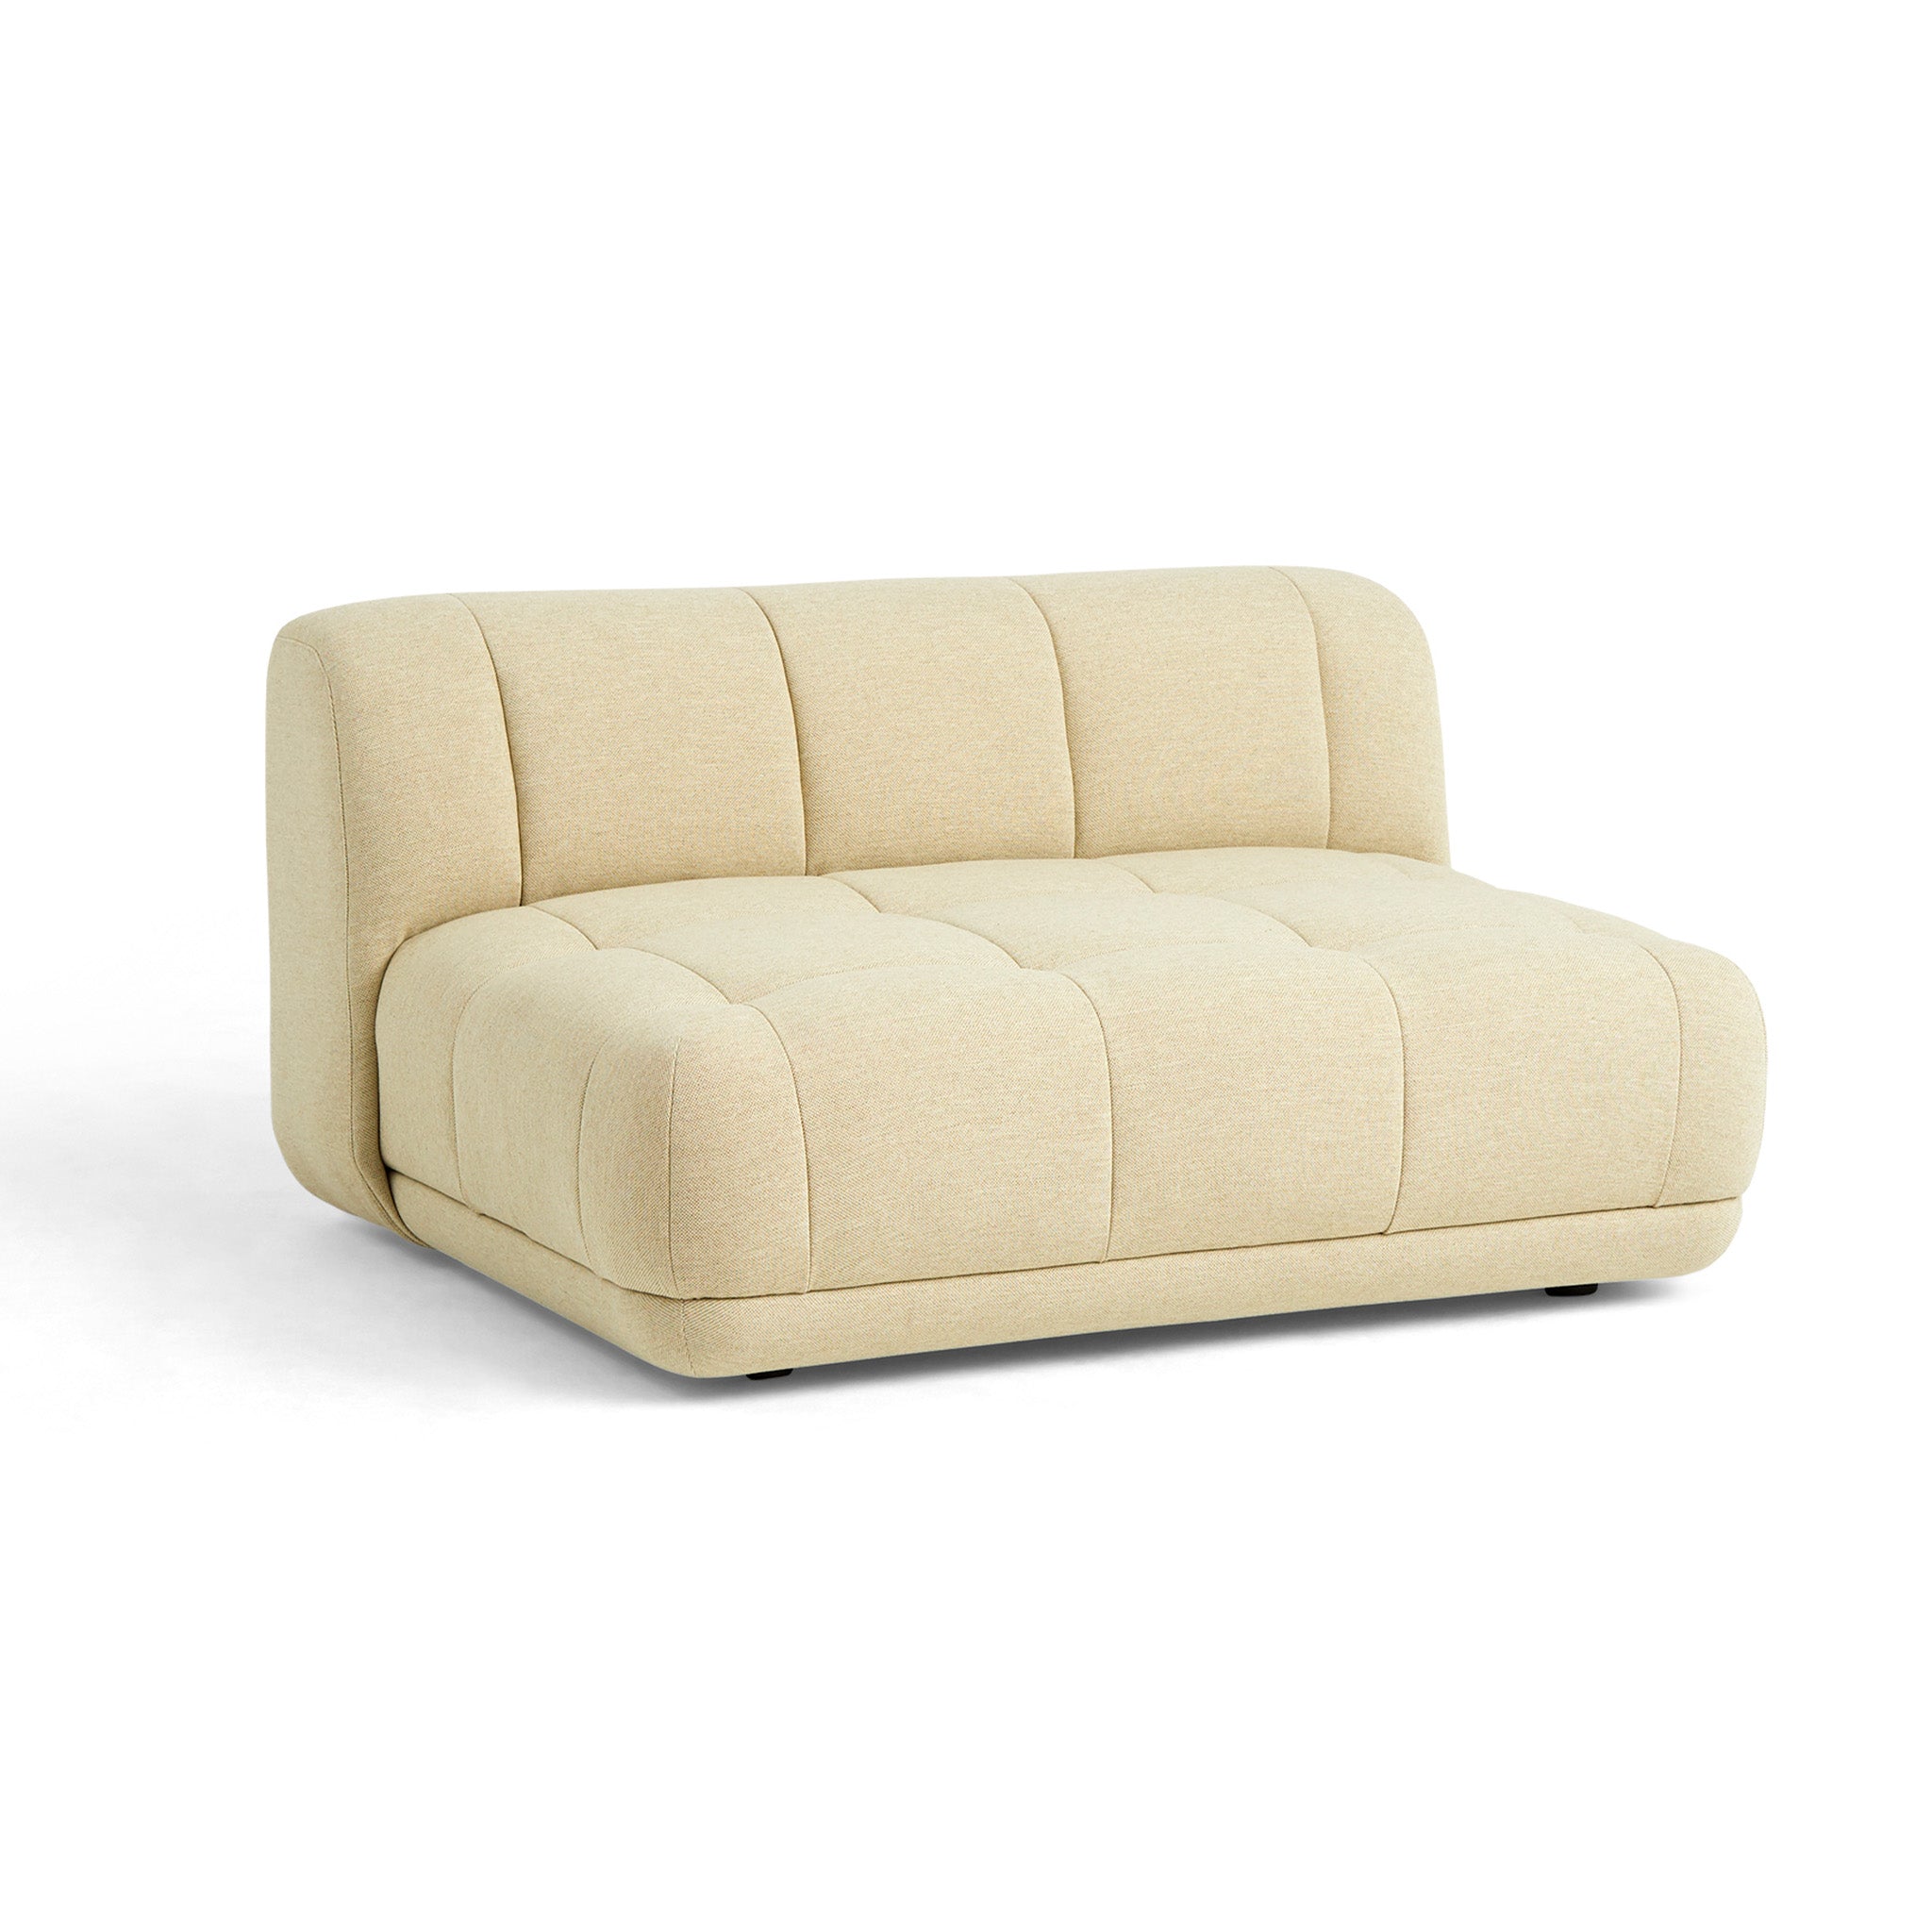 Quilton Sofa - Free Standing Modules By Hay